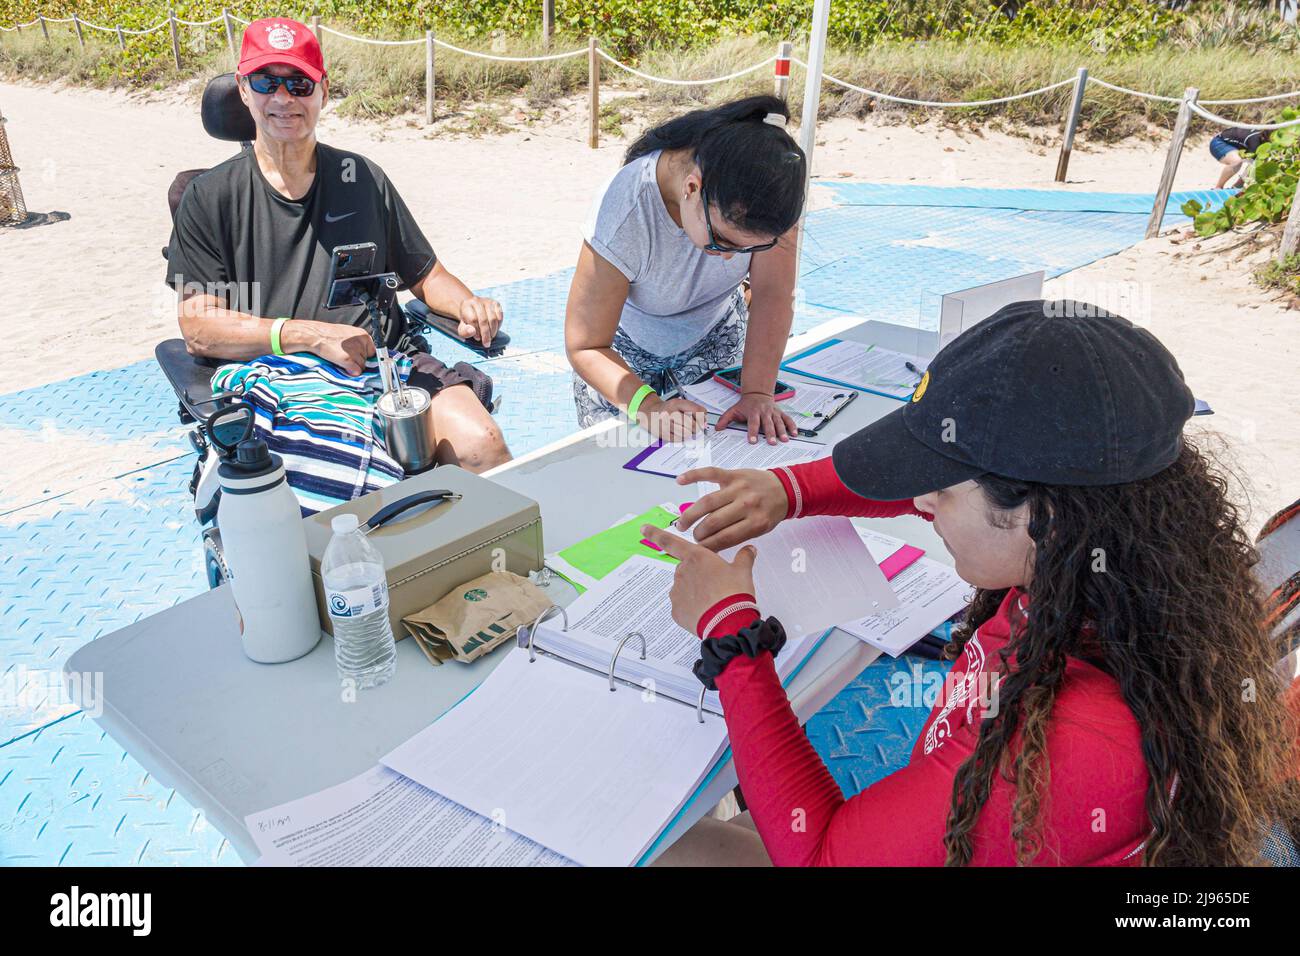 Miami Beach Florida,Sabrina Cohen Adaptive Beach Day,disabled special needs handicapped WaterWheels floating wheelchair,man registering Stock Photo